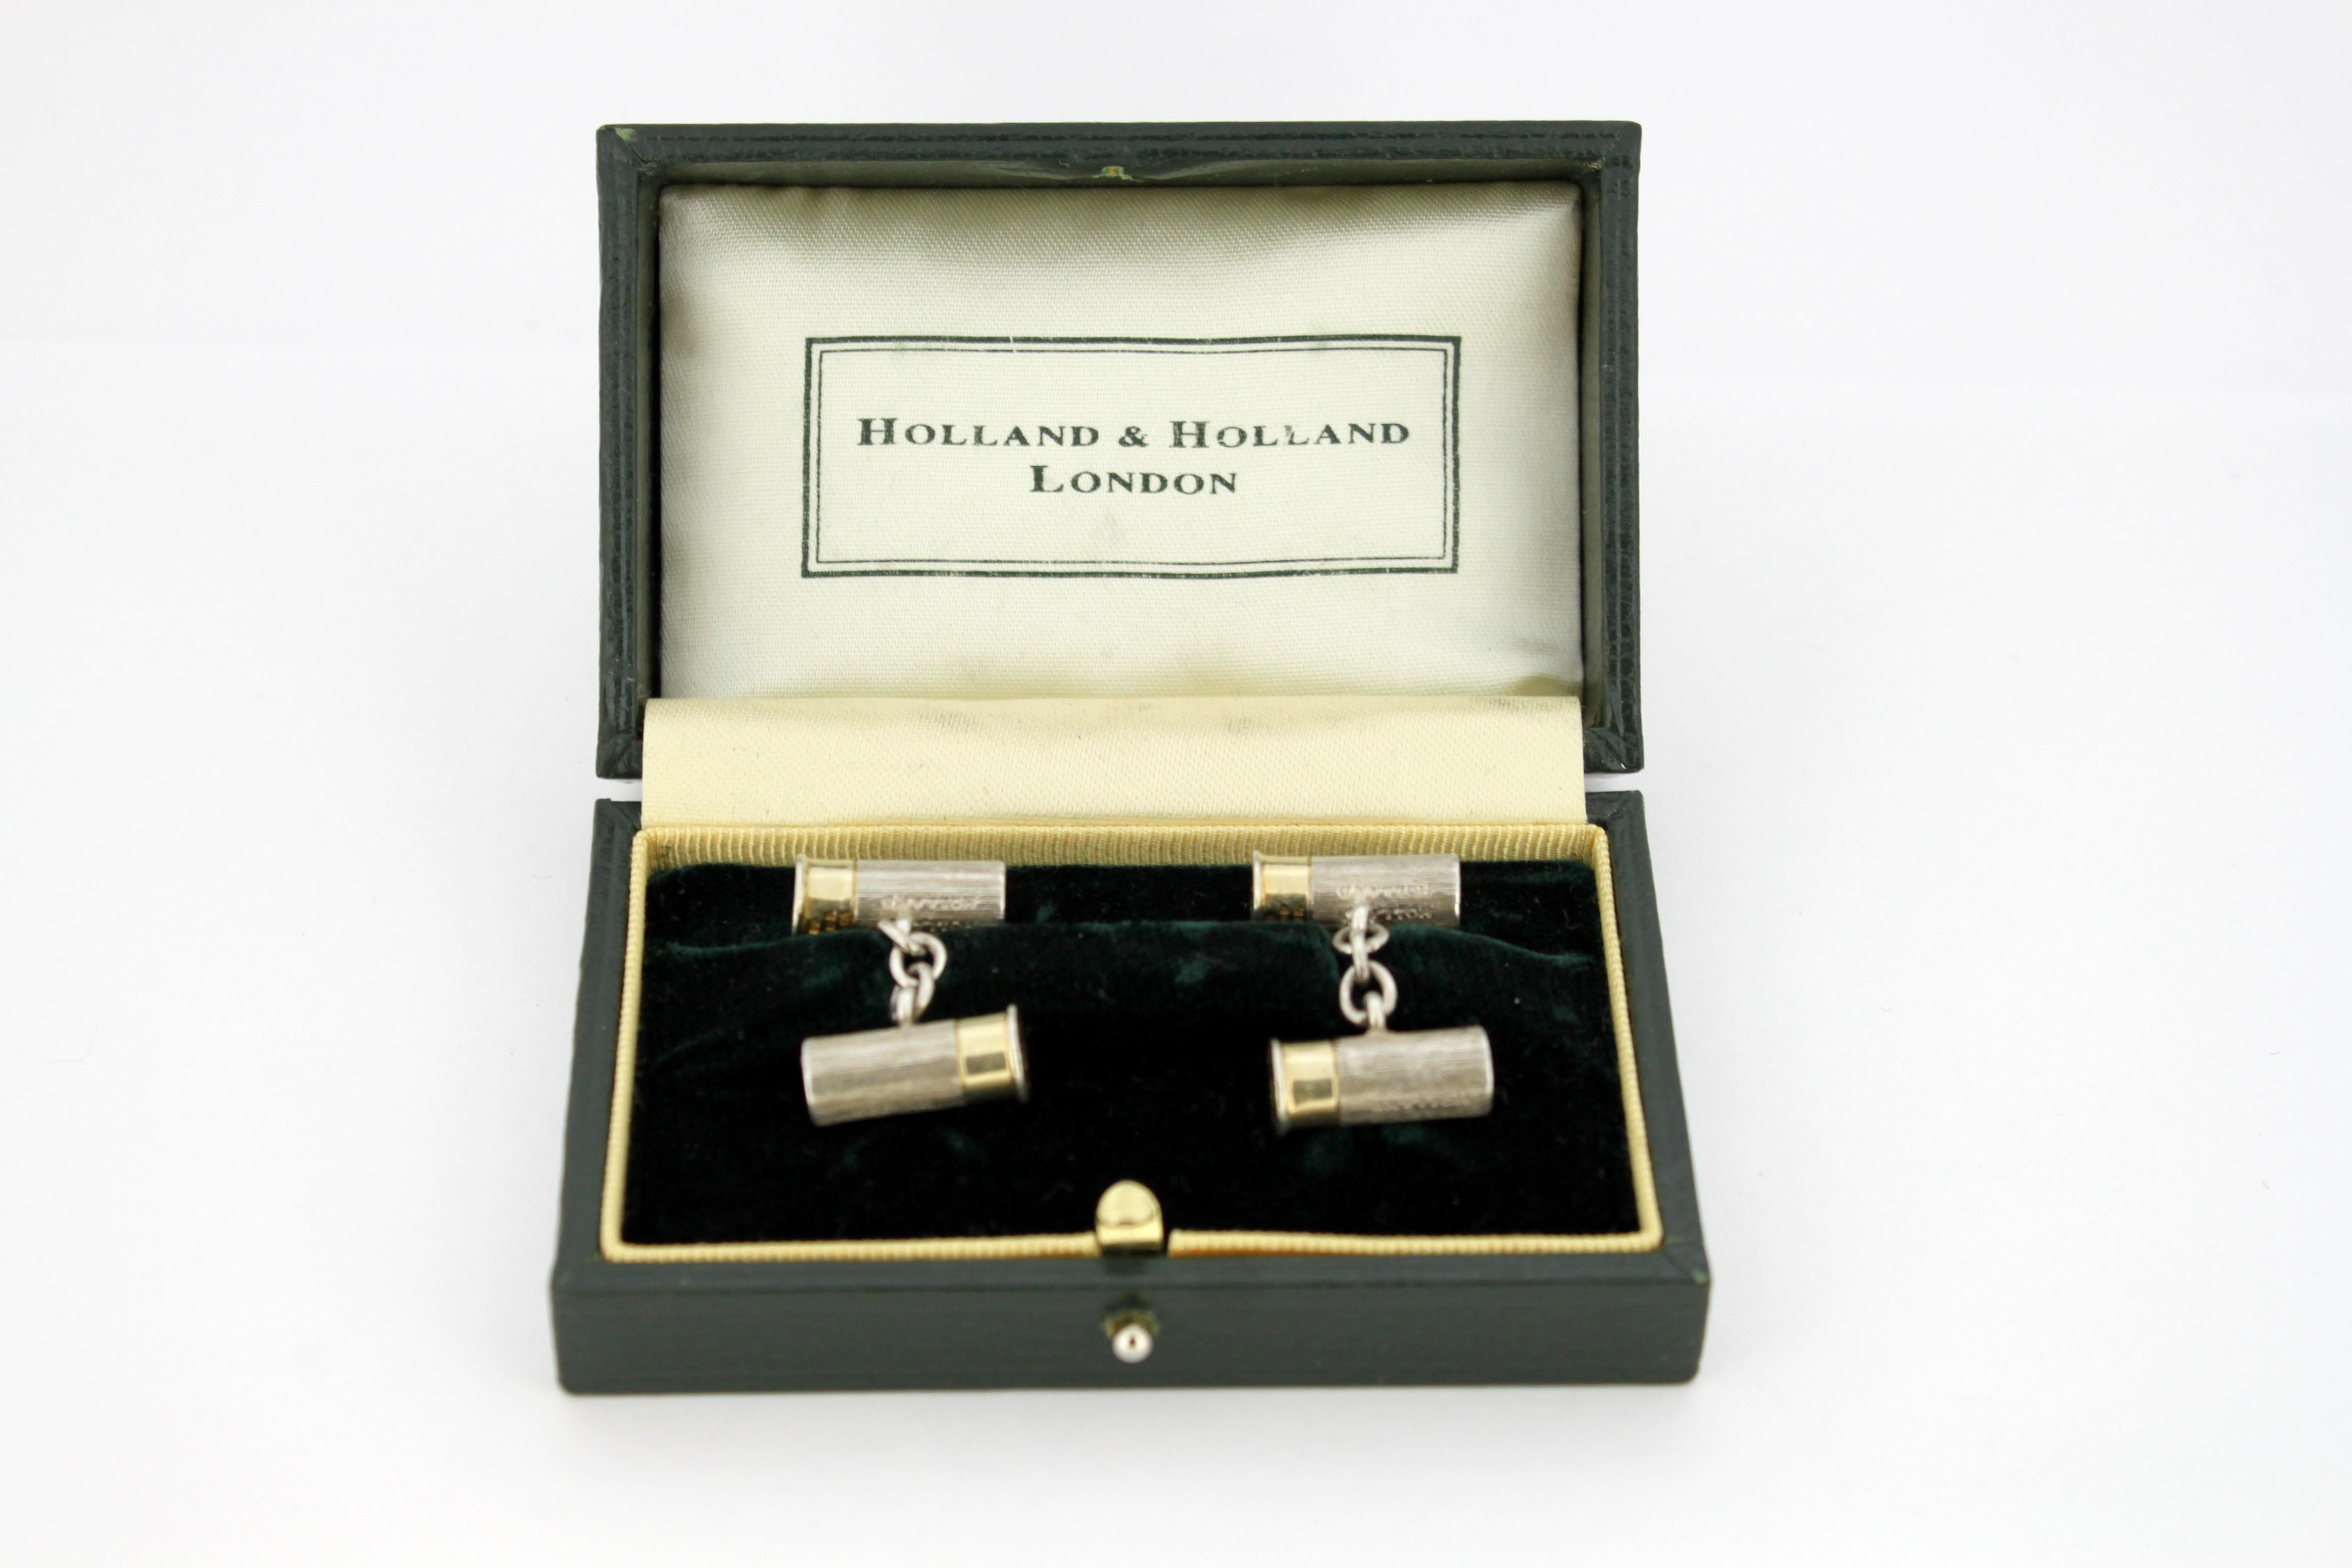 Bullet cufflinks
Made in Birmingham 1997
Maker : Holland & Holland
Fully hallmarked

Dimensions - 
Size : 3 x 1.7 cm
Total weight : 25 grams

Condition: General used, minor surface wear and tear, great overall condition, please see pictures.

Comes